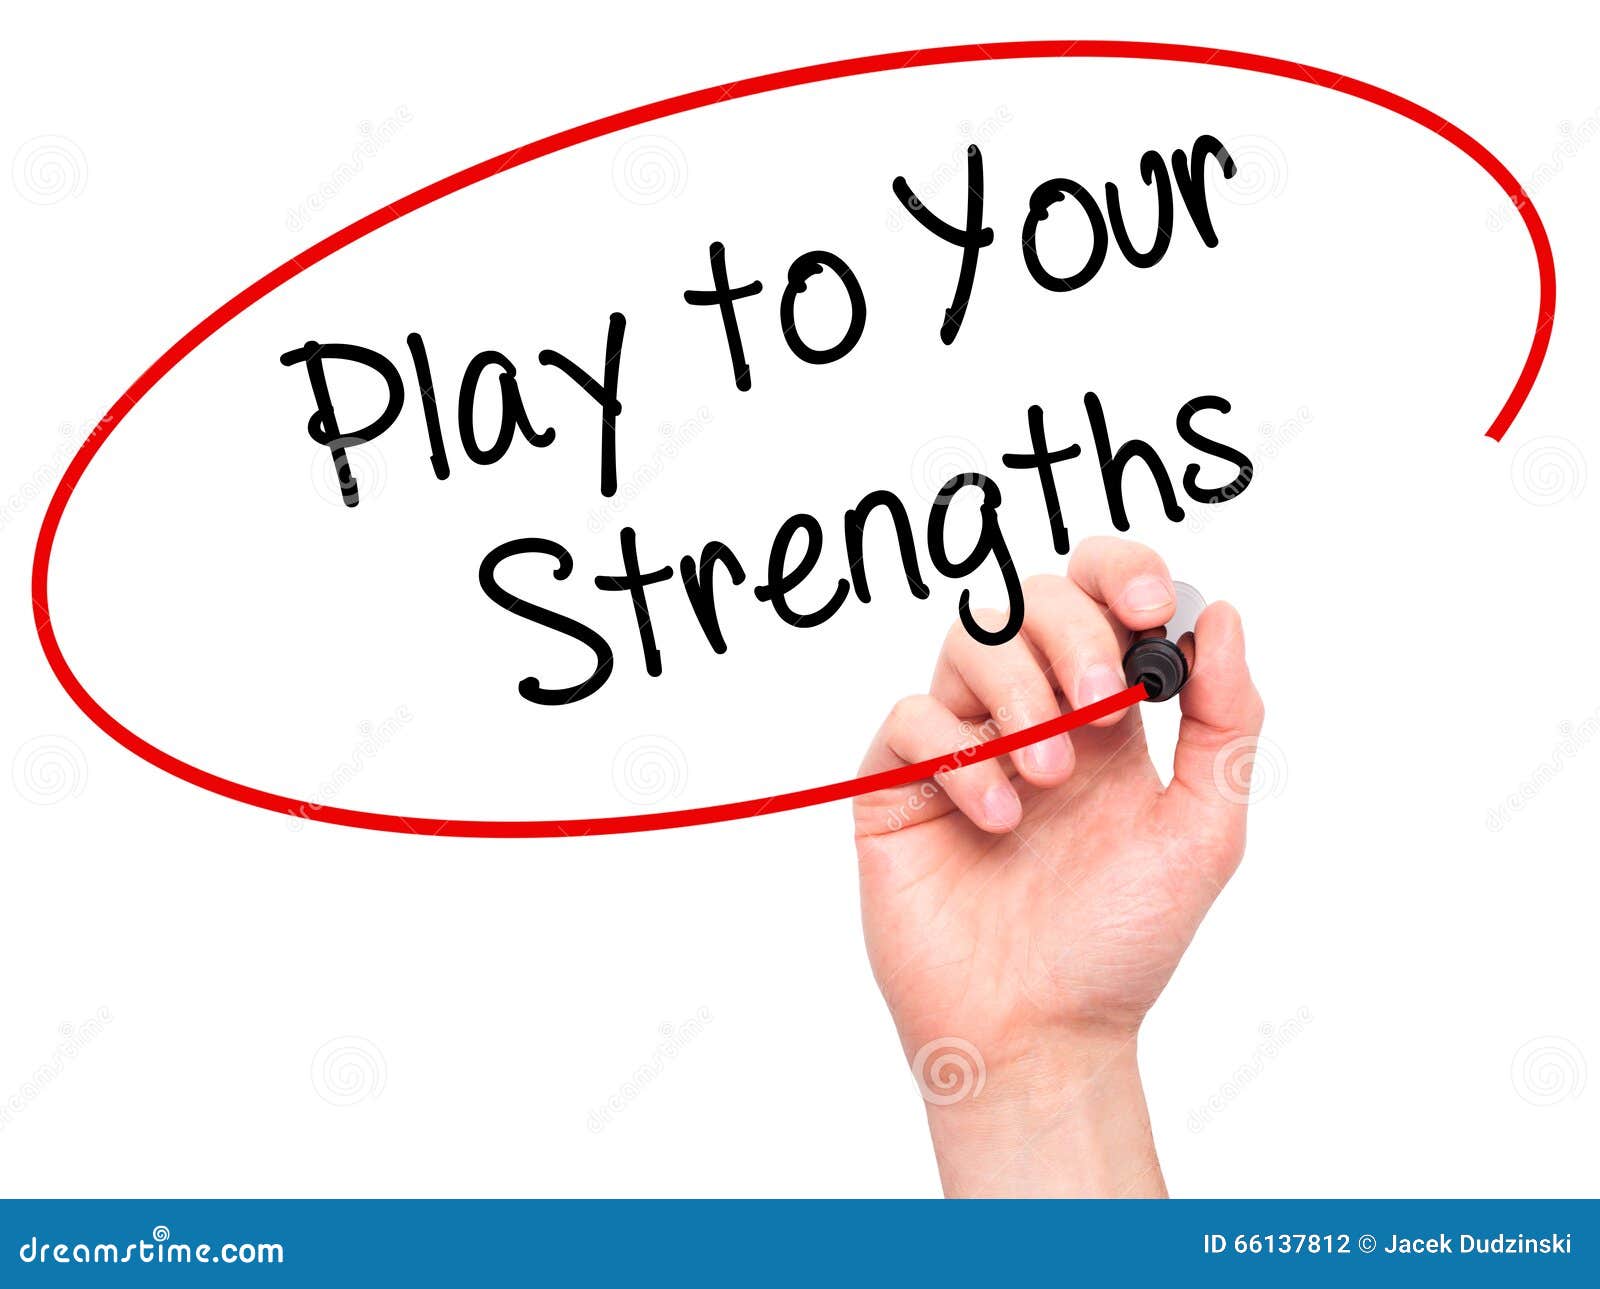 Play To Your Strengths As A Speaker